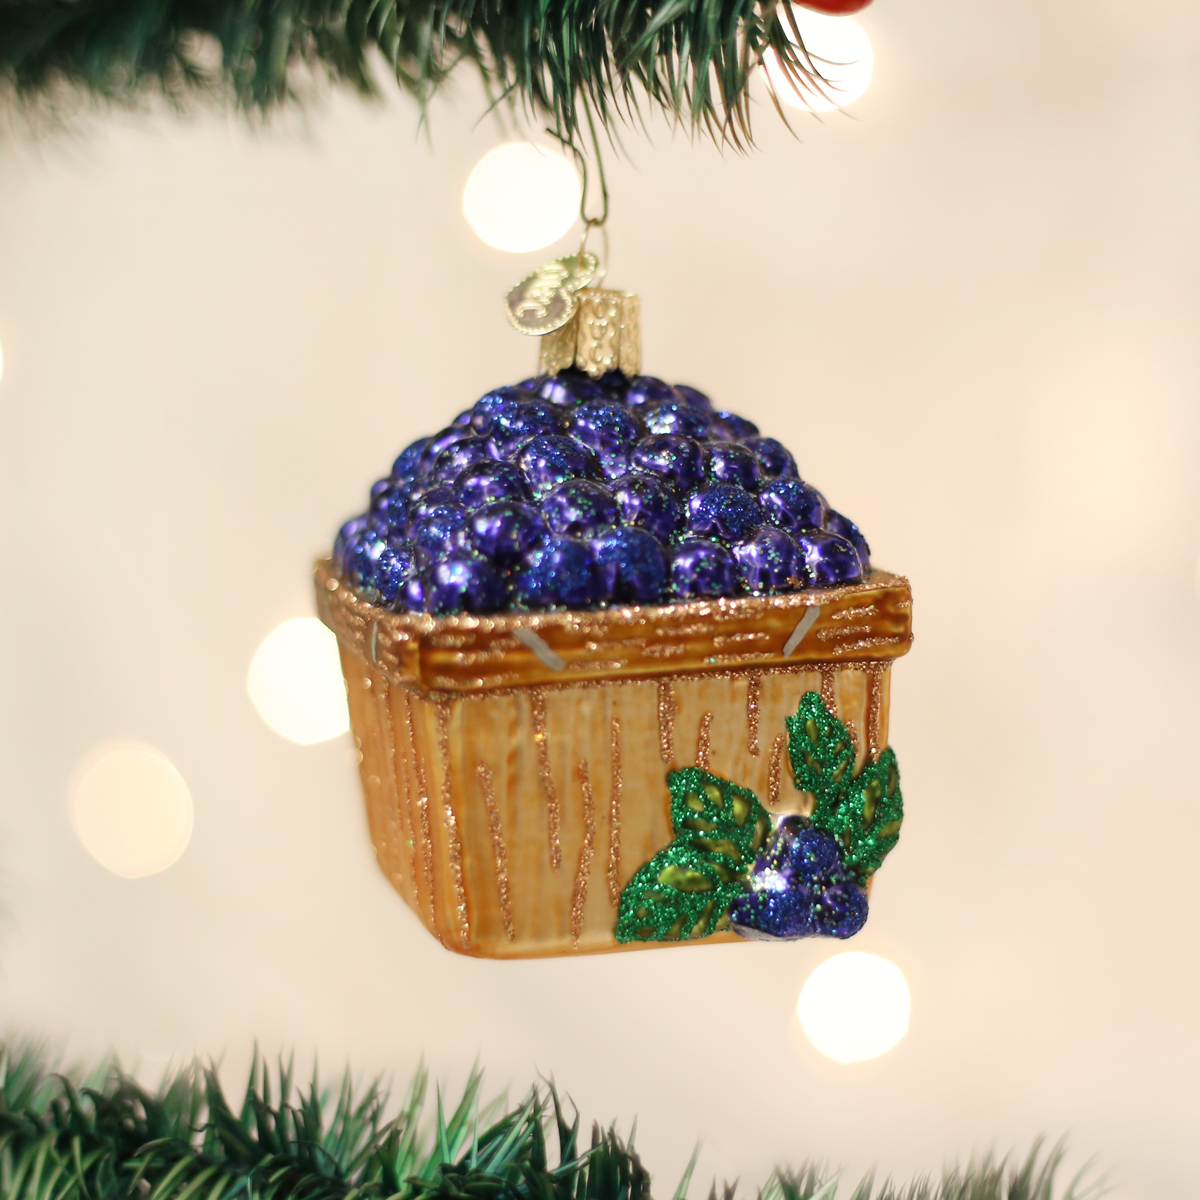 Basket of Blueberries Blown Glass Ornament